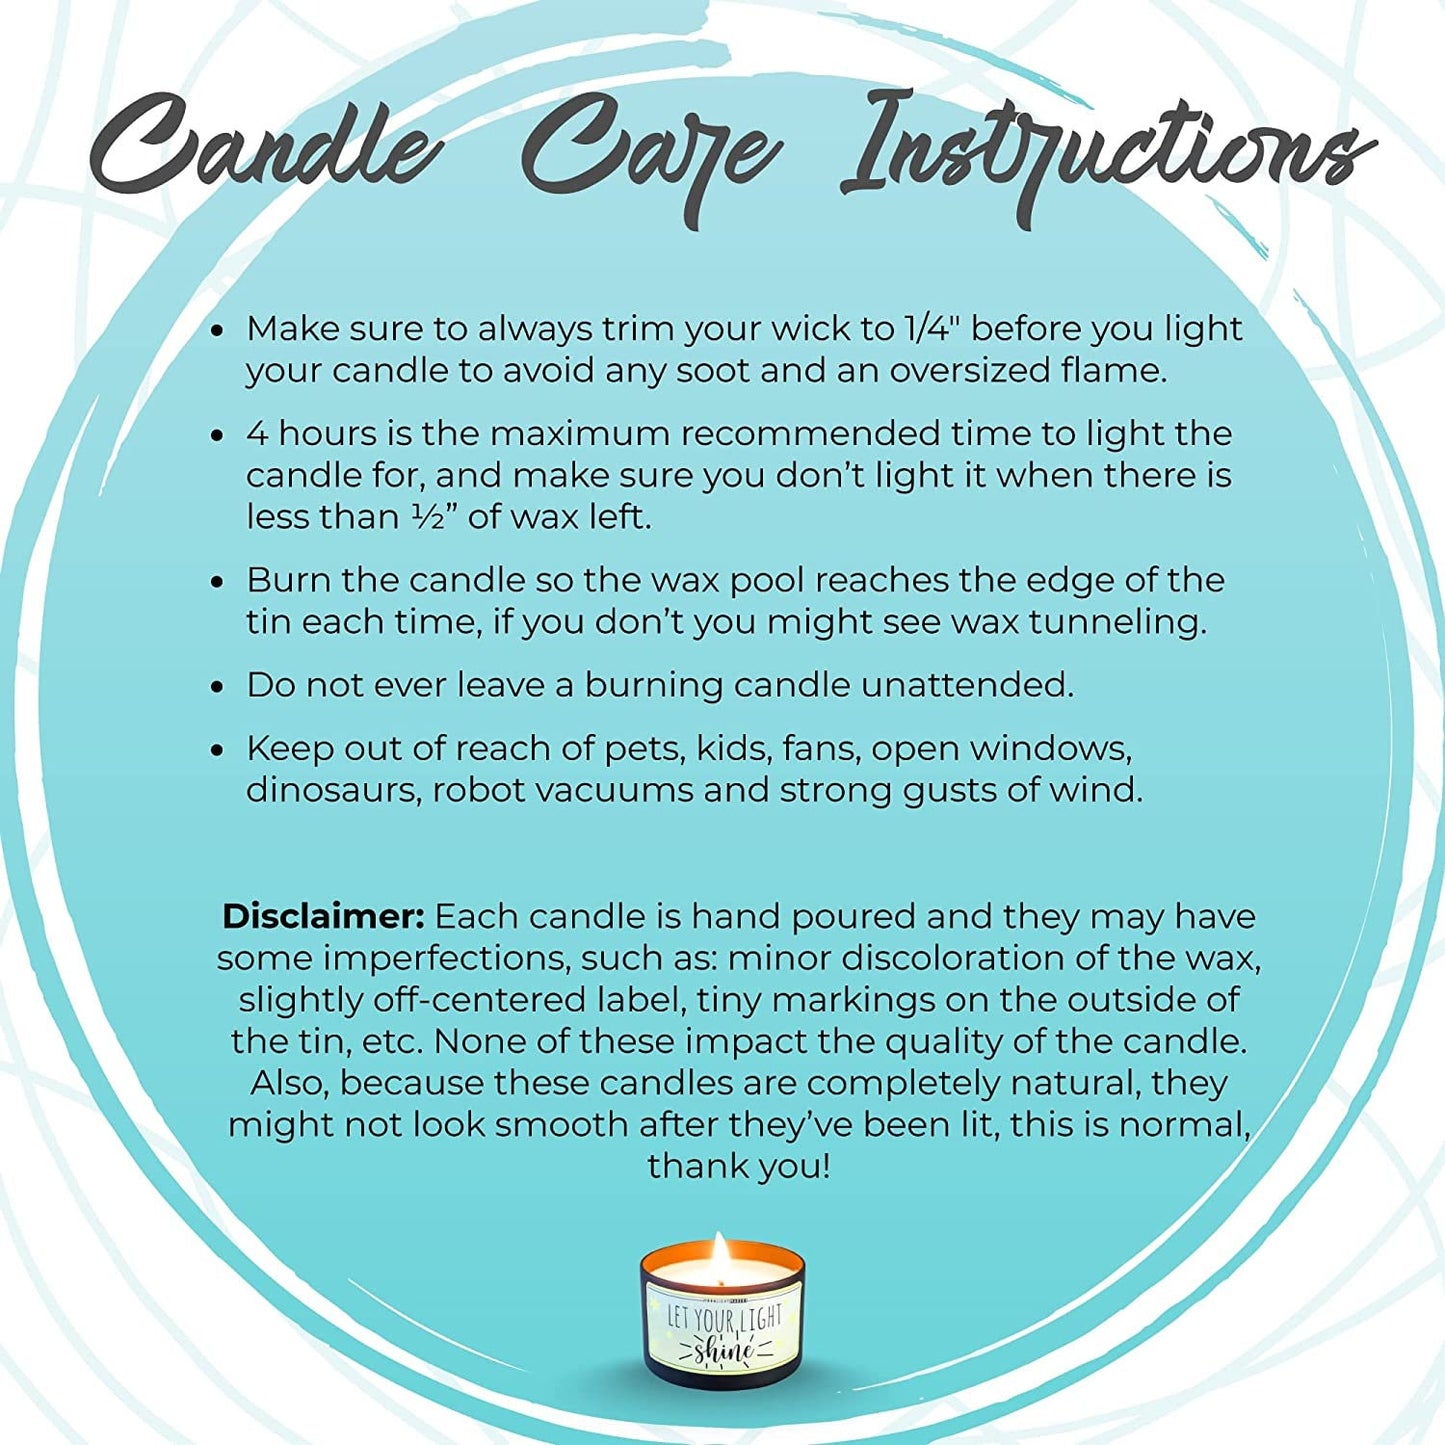 Leave Me Alone, I'm Introverting - 8oz Candle - Choose Your Scent - 100% Natural Soy Wax